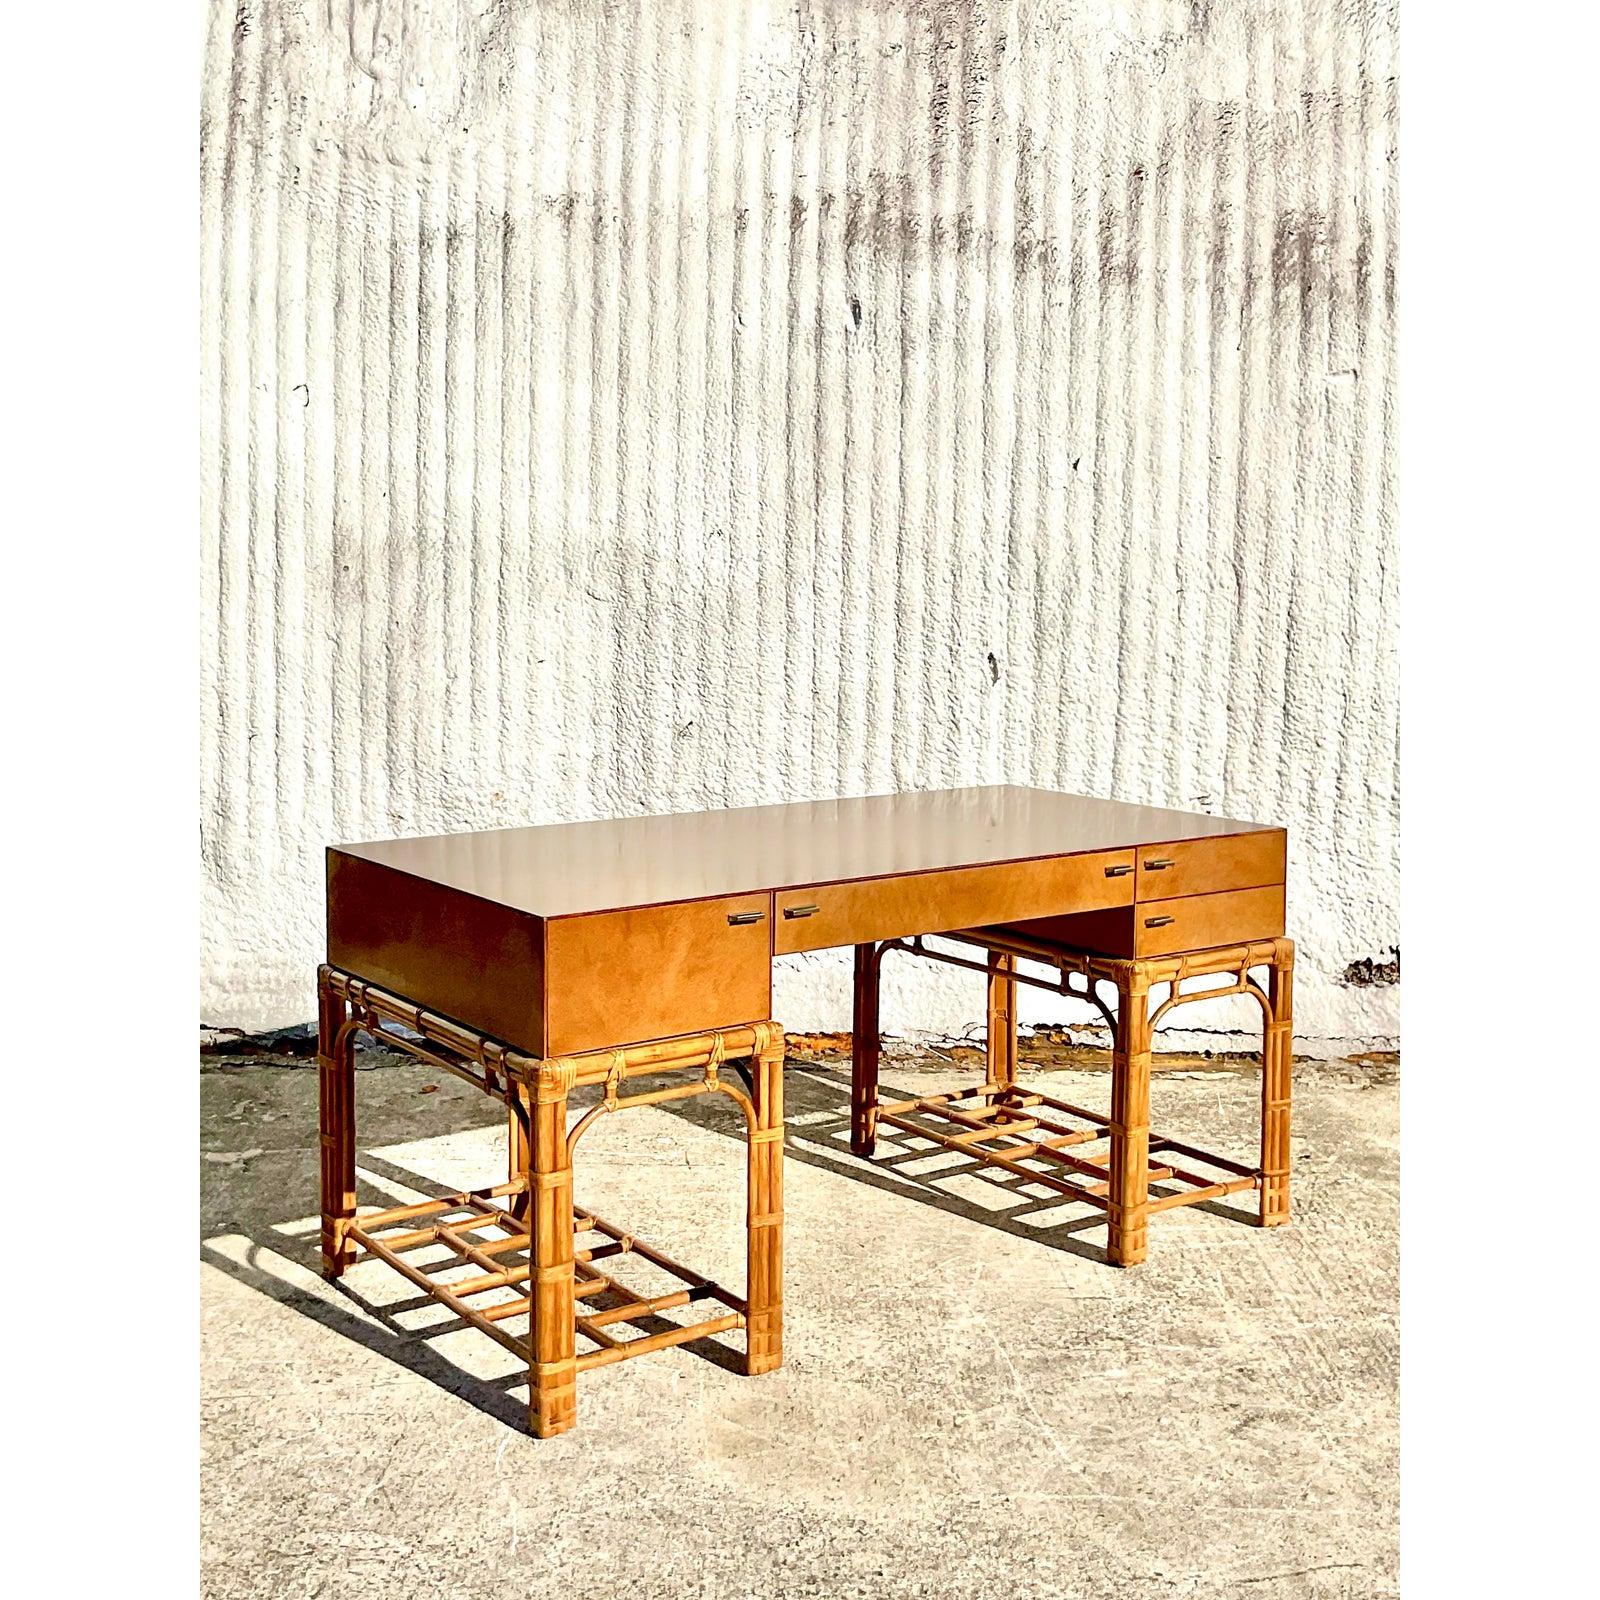 Stunning vintage Coastal executive desk. Made by the iconic Henredon company. Part of their coveted Circa East collection. Beautiful Birdseye Maple top in a Campaign design that rests on a chic rattan frame. Nickel hardware and rawhide wraps.